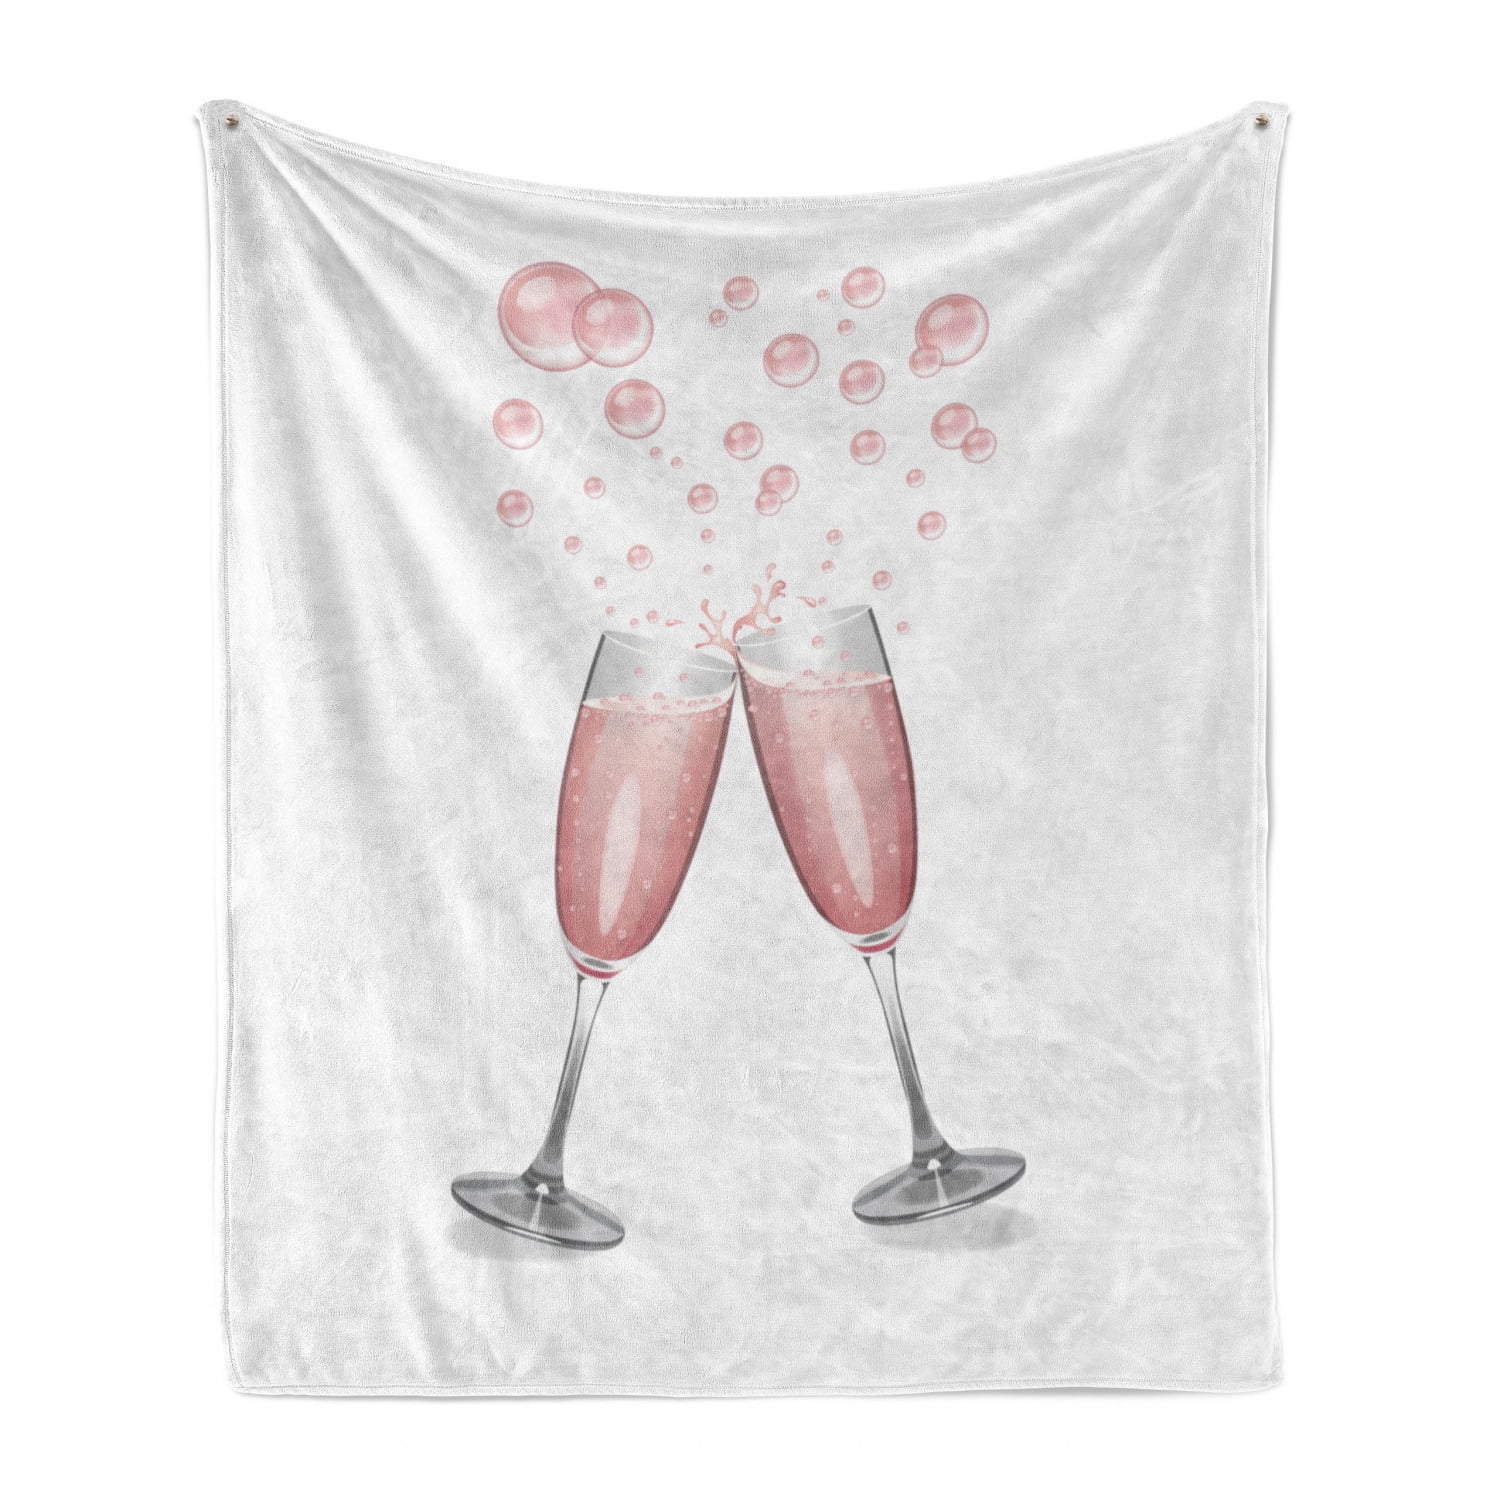 Cozy Plush for Indoor and Outdoor Use Clinking Glasses with Blush Drink Celebration Themed Party Illustration 70 x 90 Blush and Pale Grey Ambesonne Champagne Soft Flannel Fleece Throw Blanket 